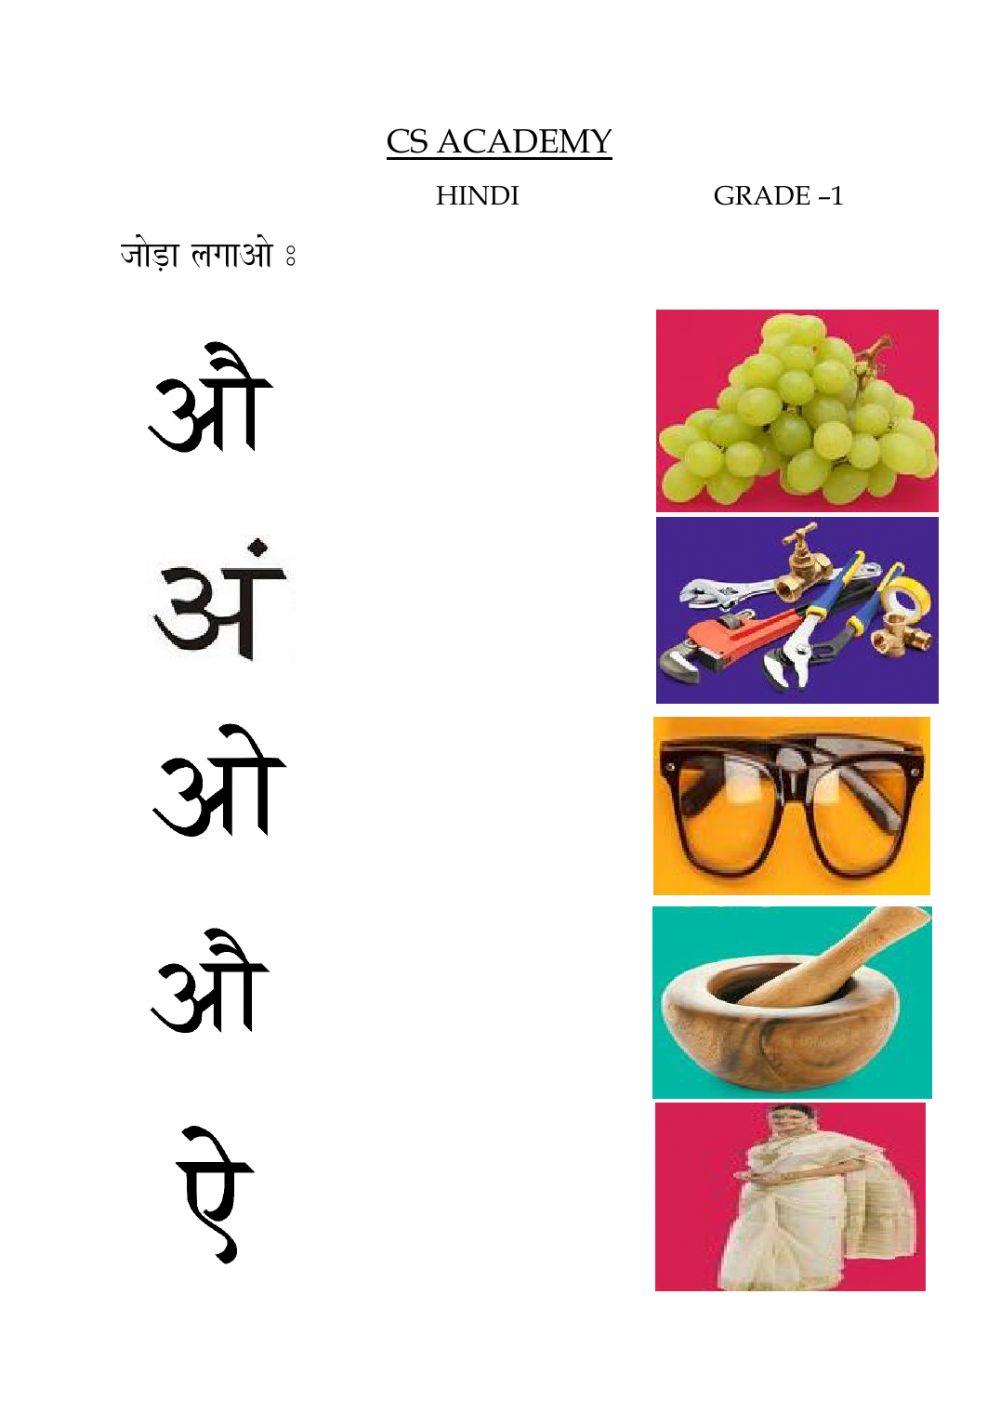 Match the letter with picture